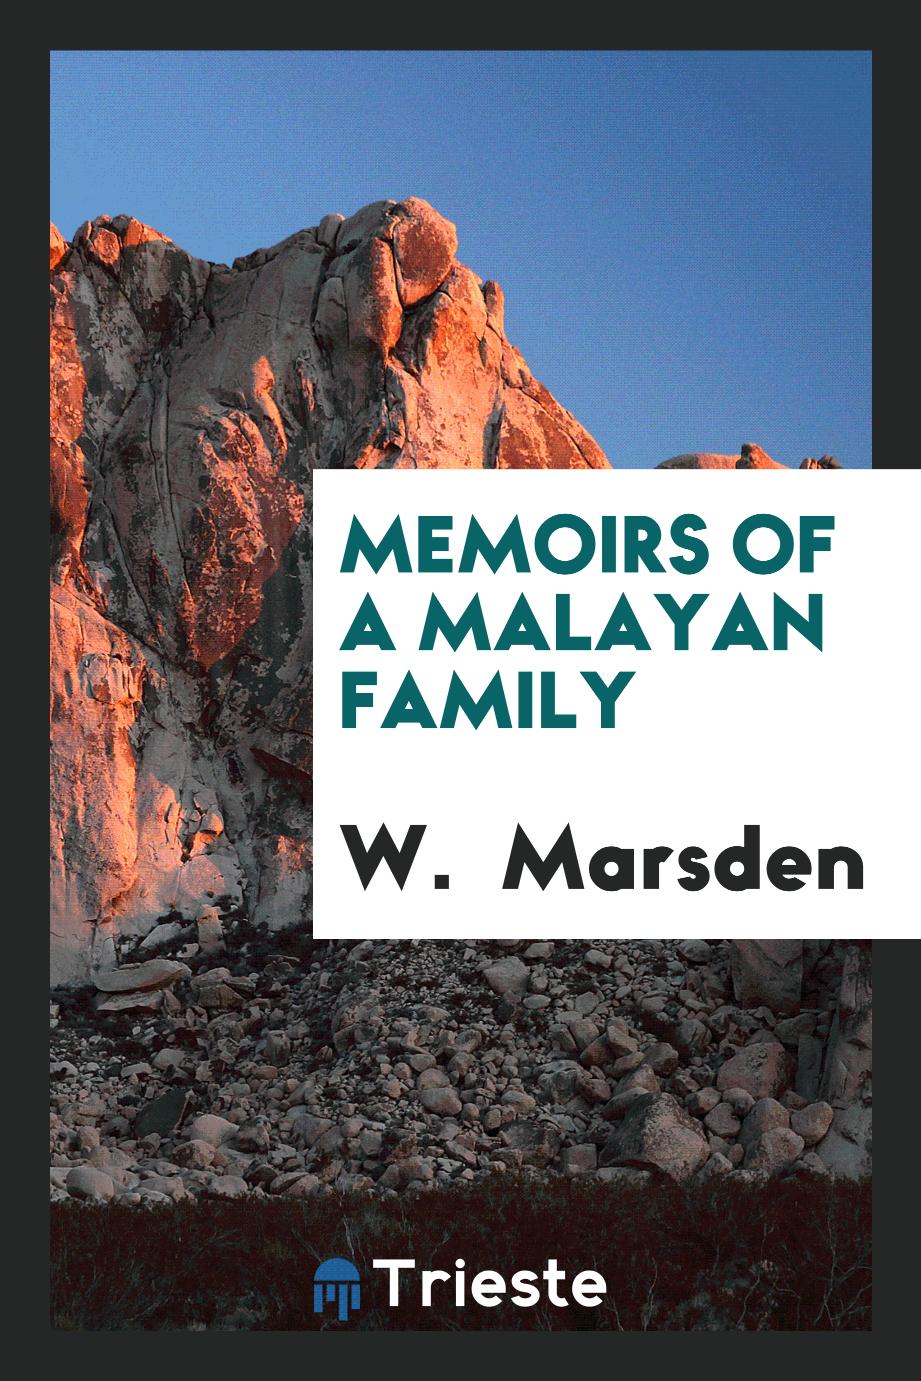 Memoirs of a Malayan Family